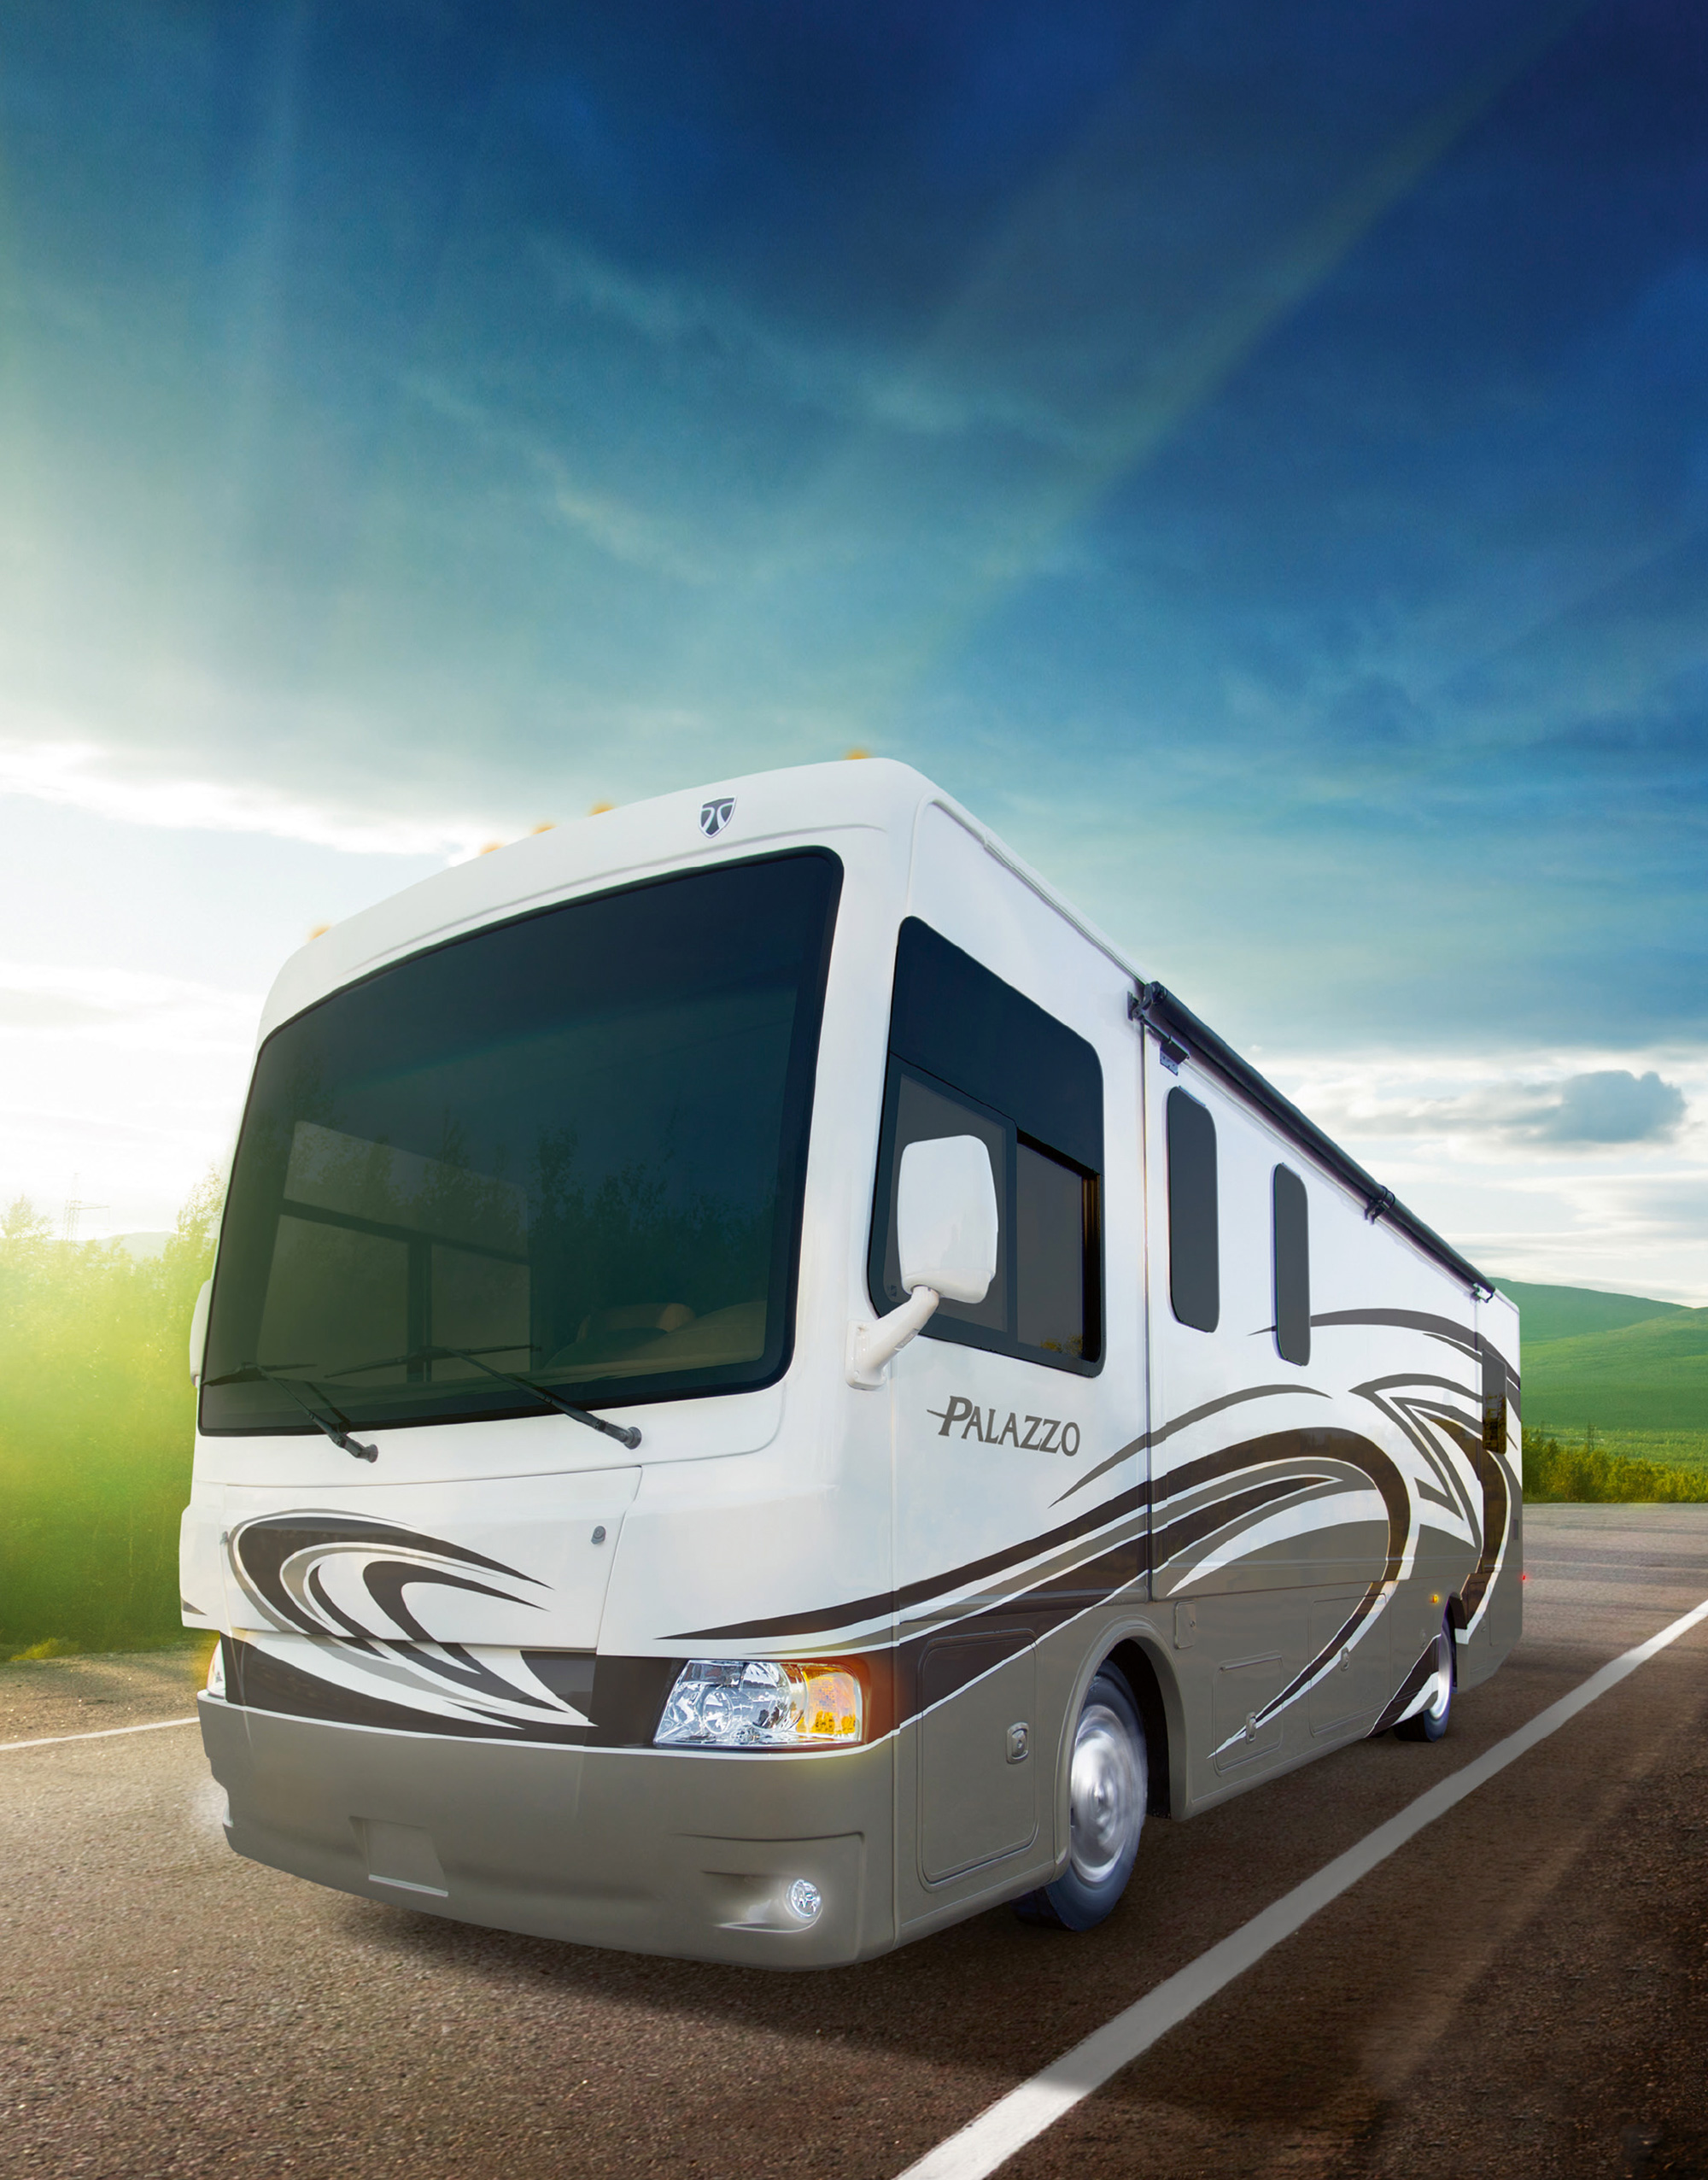 A rendering of Thor Motor Coach’s Palazzo vehicle on the road.